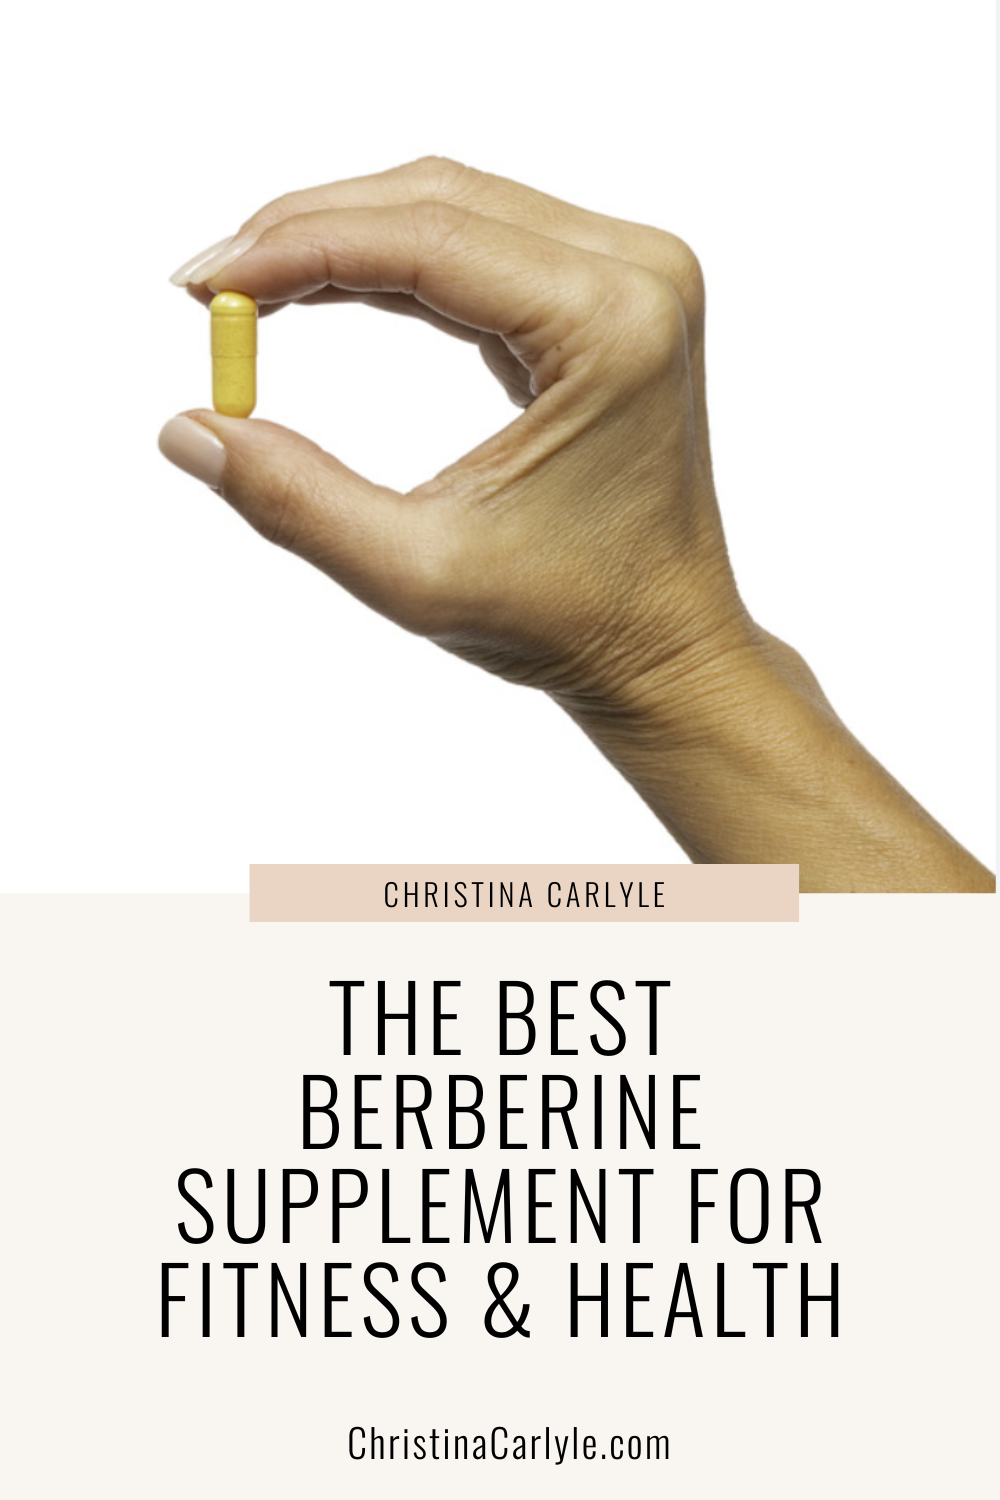 a hand holding a berberine pill and text that says The Best Berberine Supplement for Fitness and Health